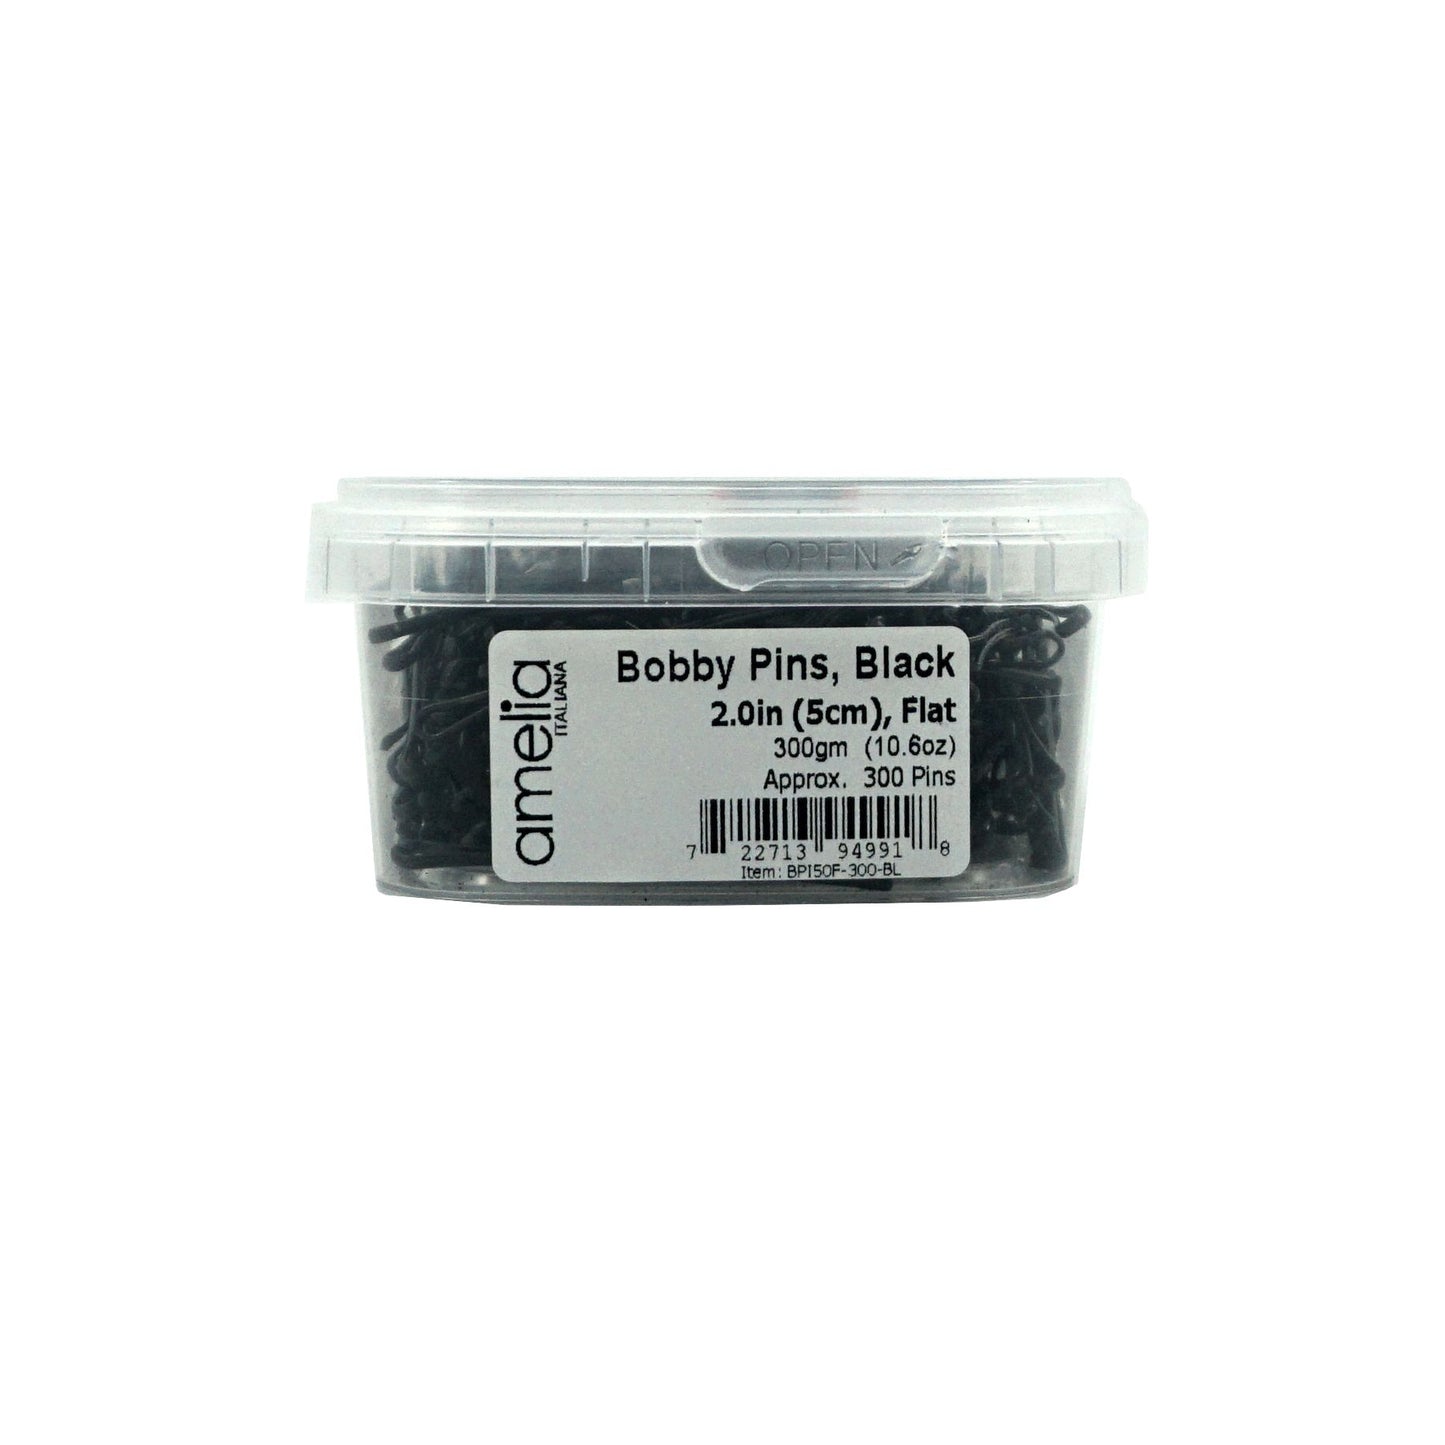 300, Black, 2.0in (5.0cm), Italian Made Flat Bobby Pins, Recloseable Stay Clean and Organized Container